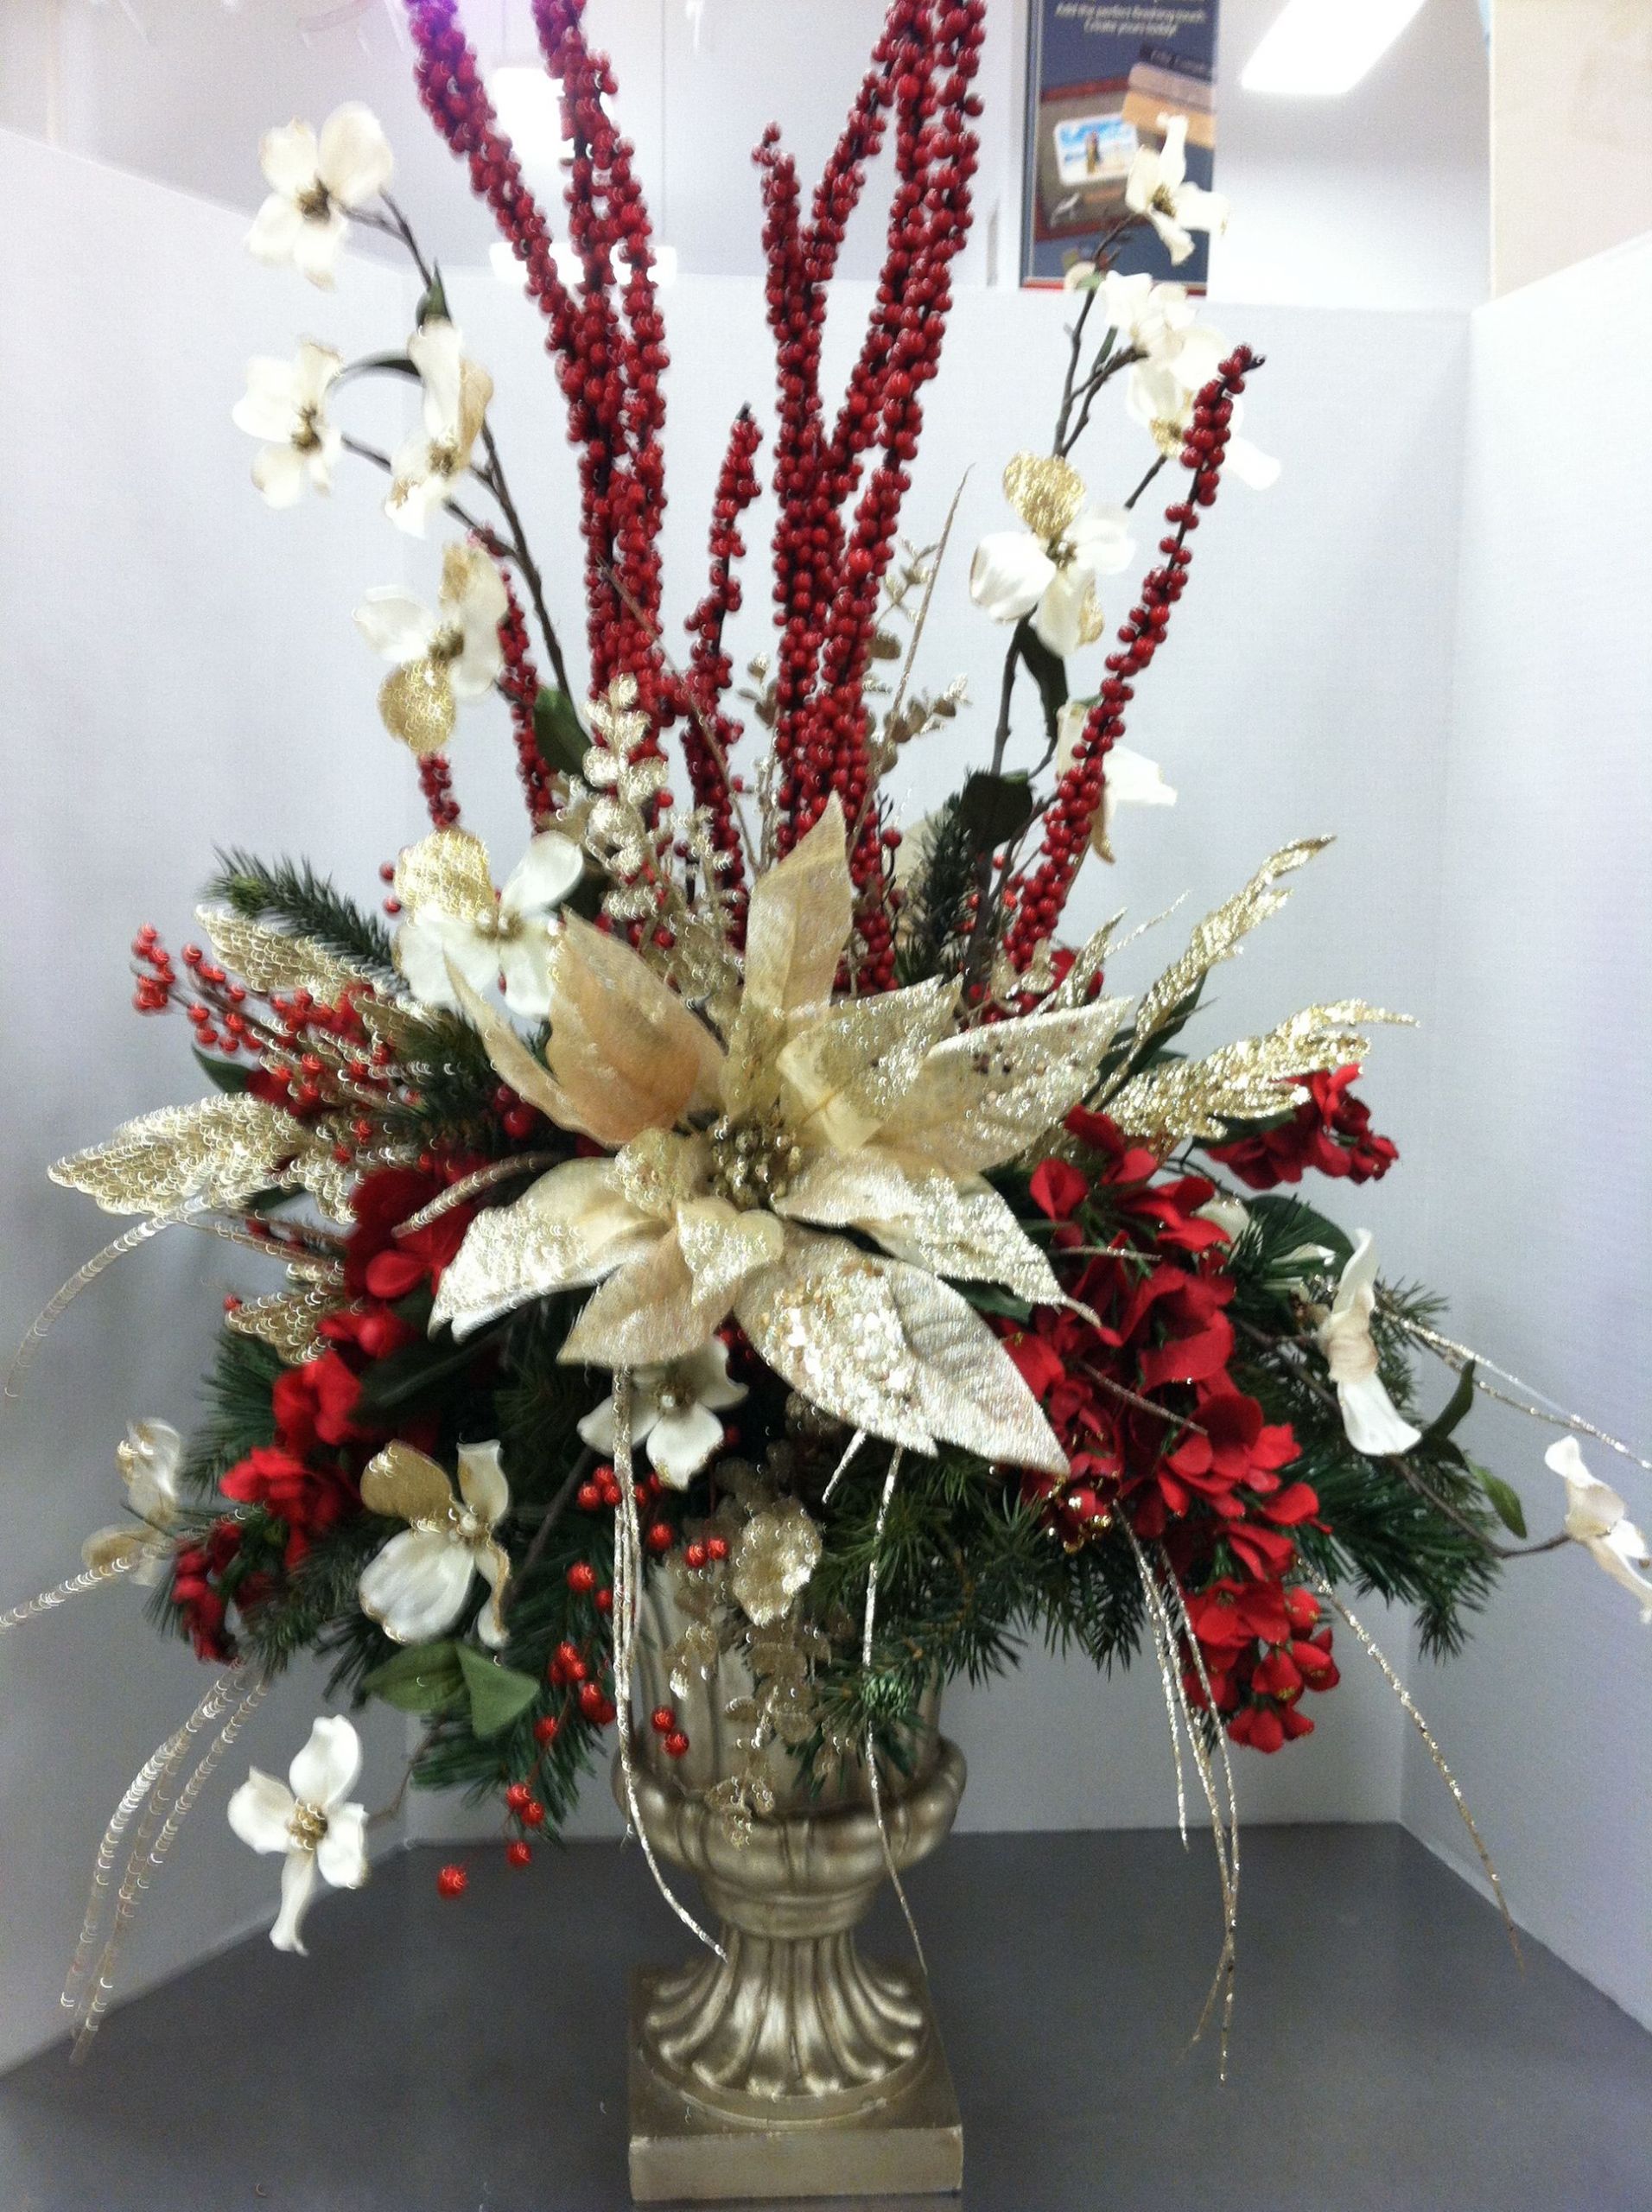 Homemade Christmas Flower Arrangements
 Trina this would be beautiful for Christmas arrangement